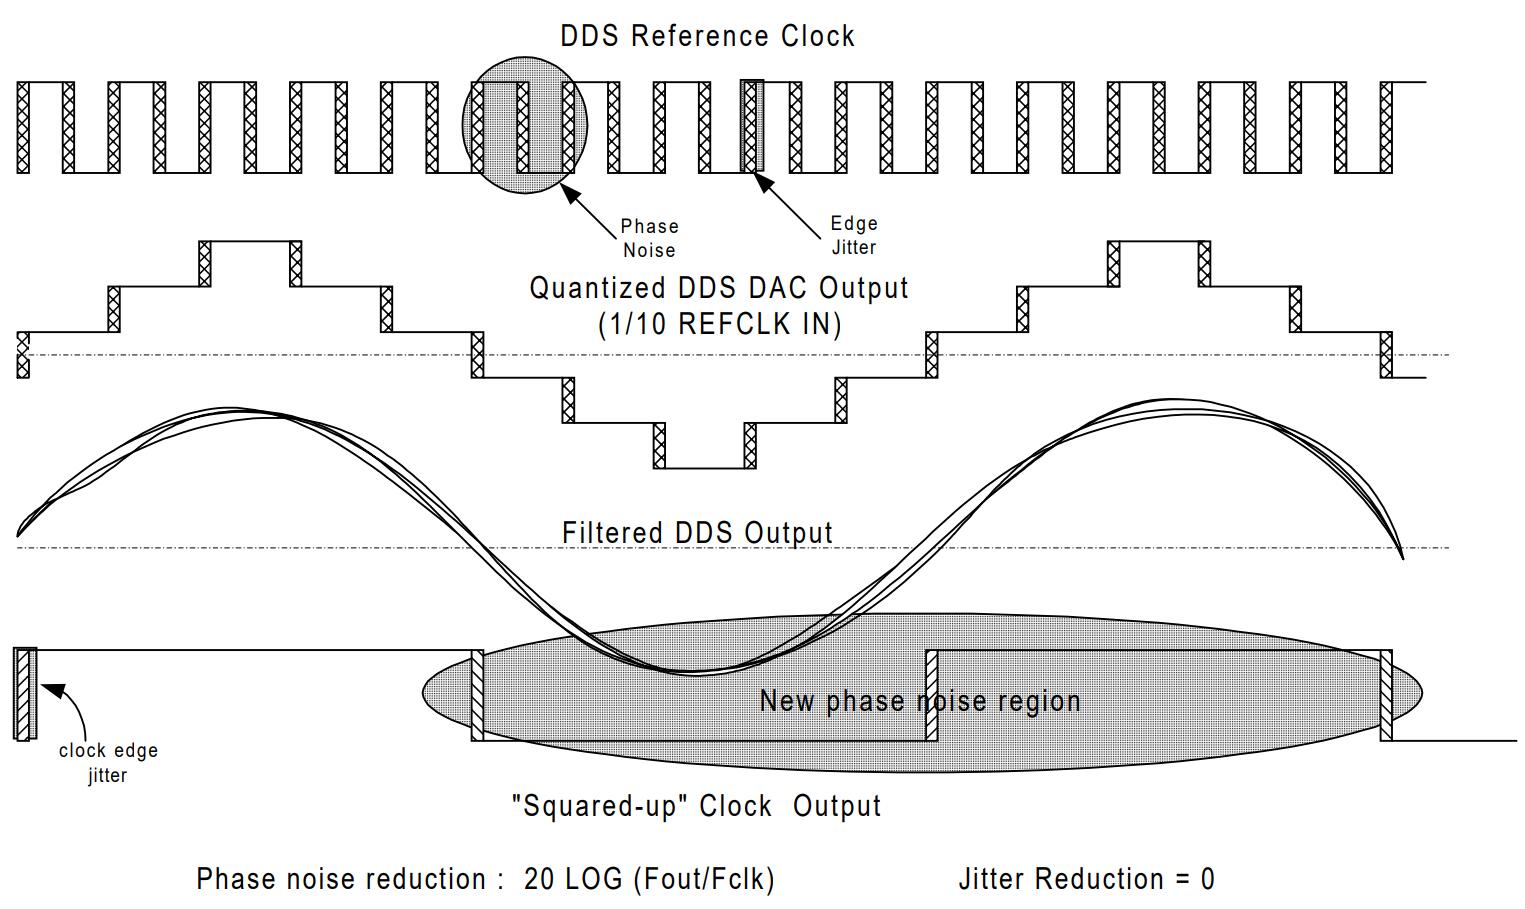 Reference clock edge uncertainty affects DDS output signal quality